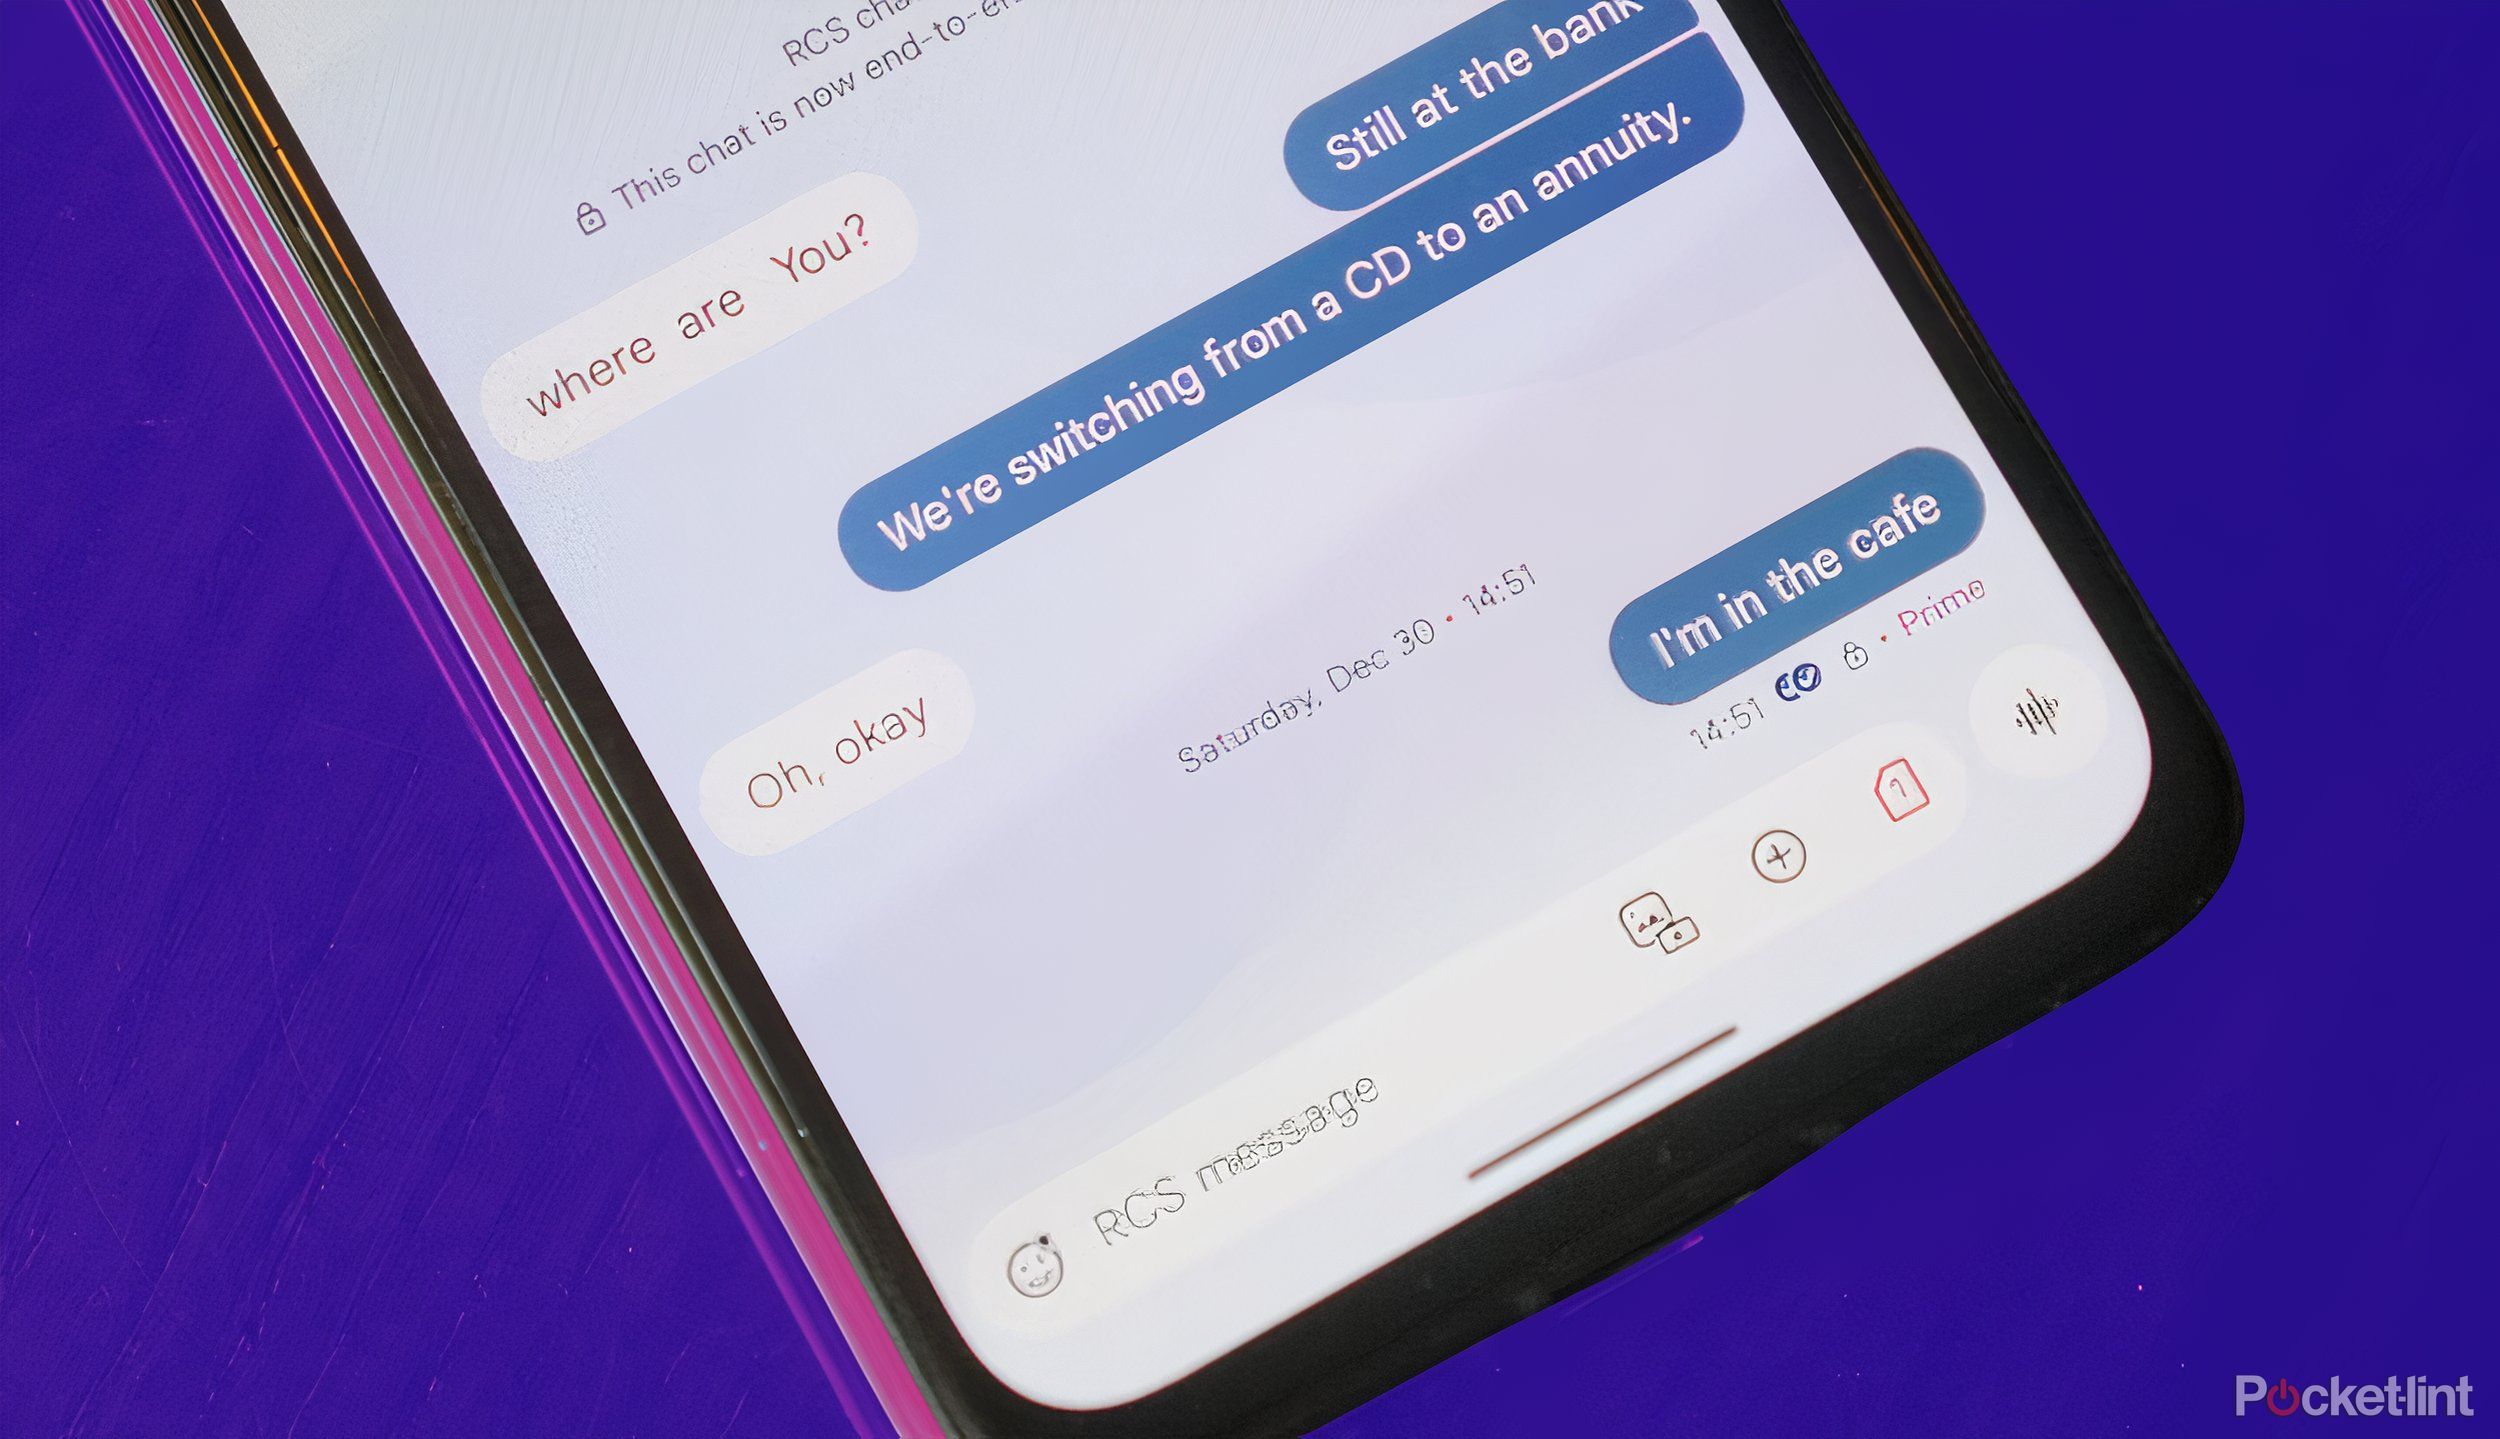 How to know if someone has read your texts on Android